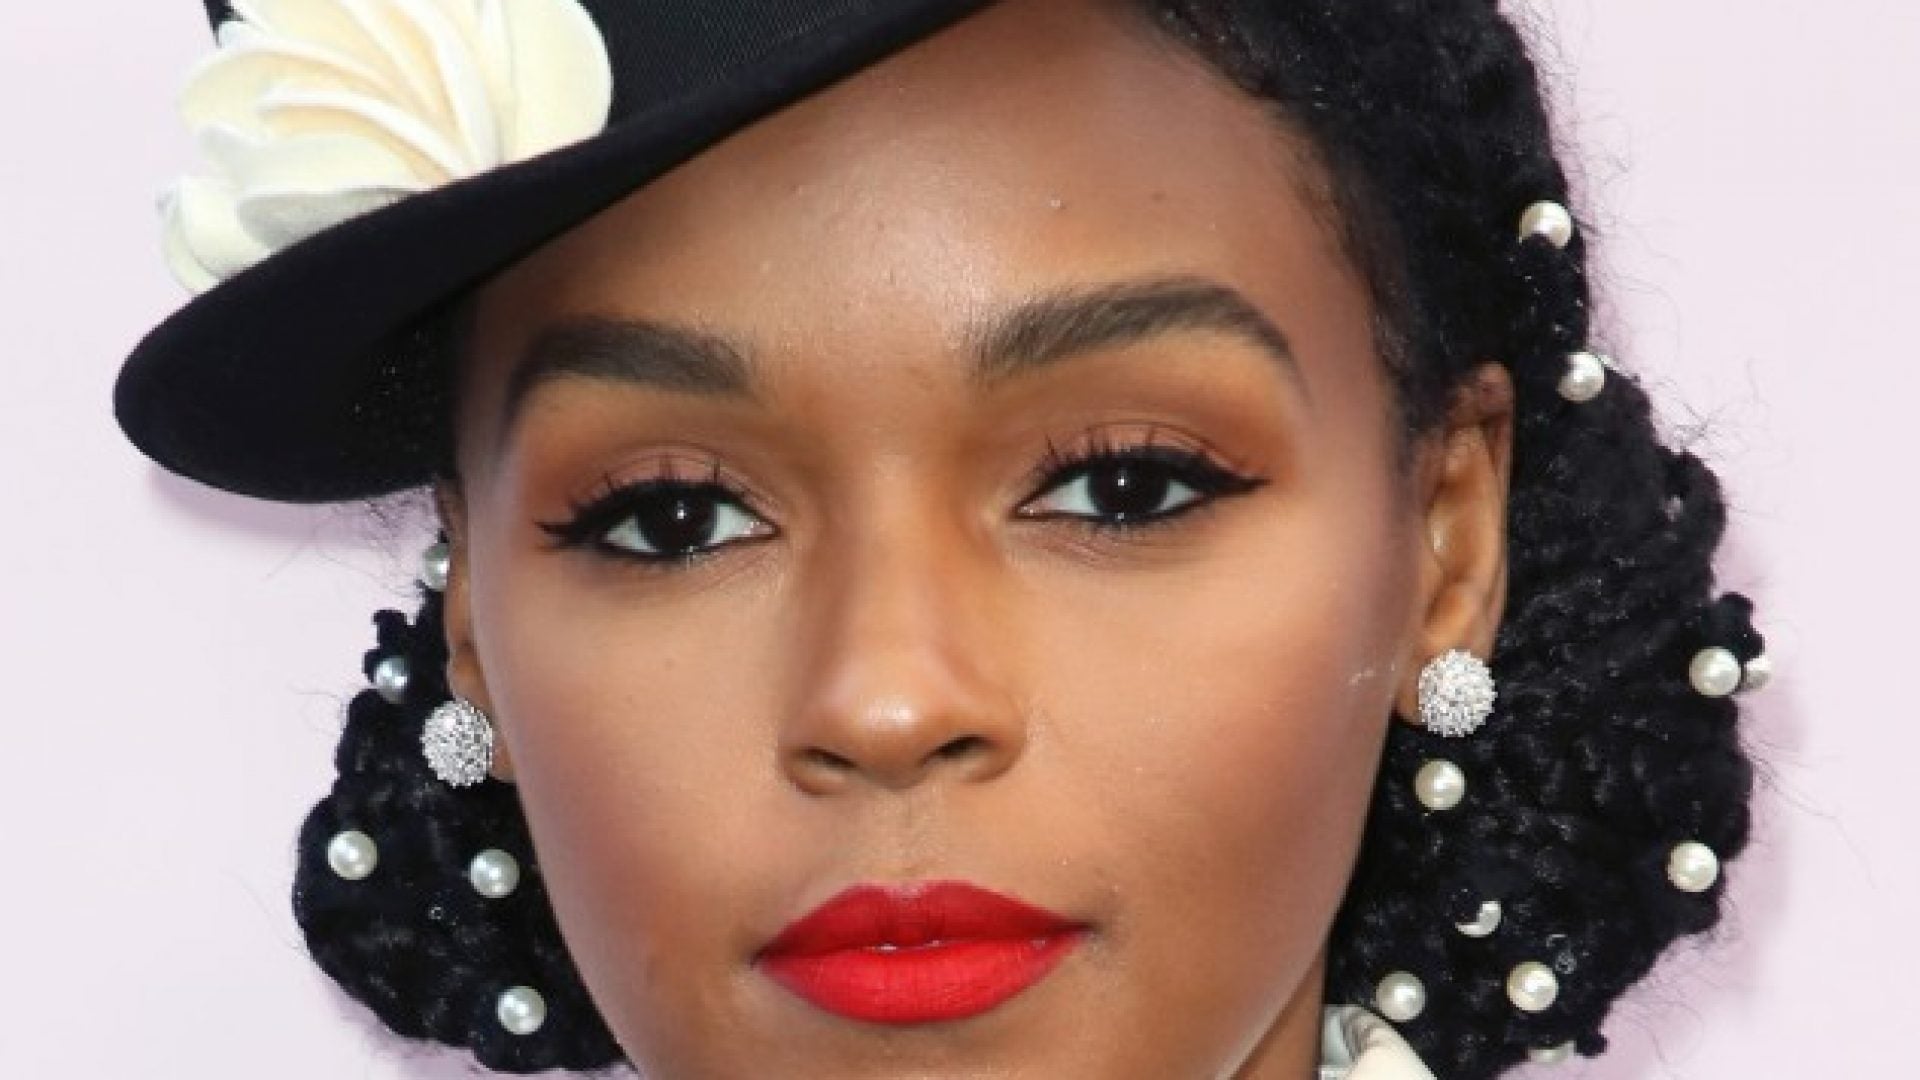 Janelle Monáe, Slick Woods, Rico Nasty And Other Celebrity Beauty Looks Of The Week